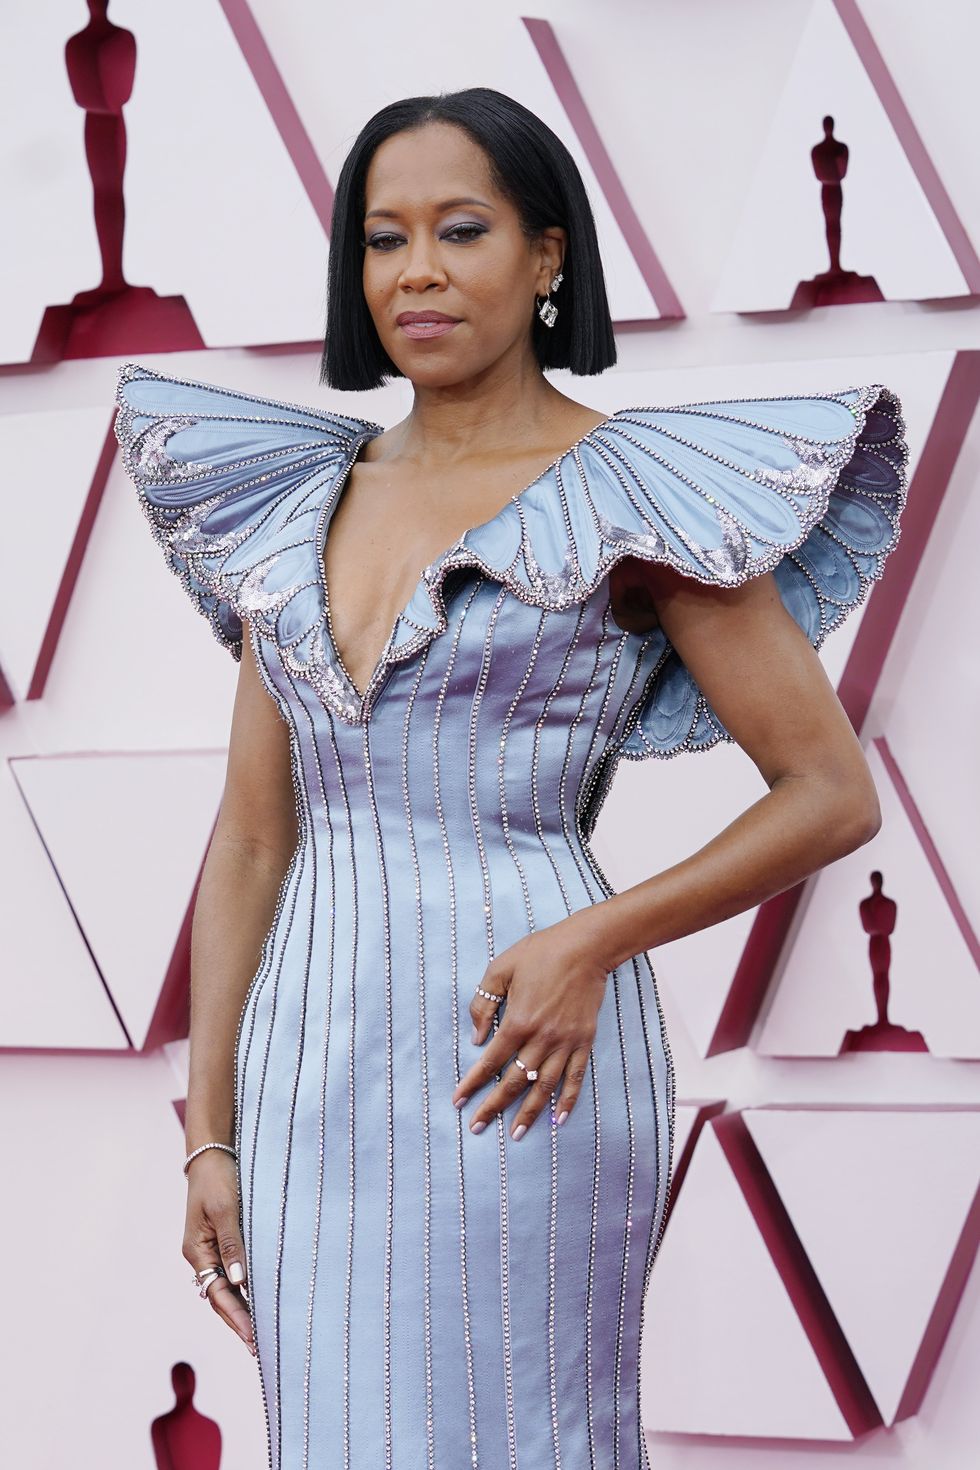 los angeles, california – april 25 regina king attends the 93rd annual academy awards at union station on april 25, 2021 in los angeles, california photo by chris pizzelo poolgetty images